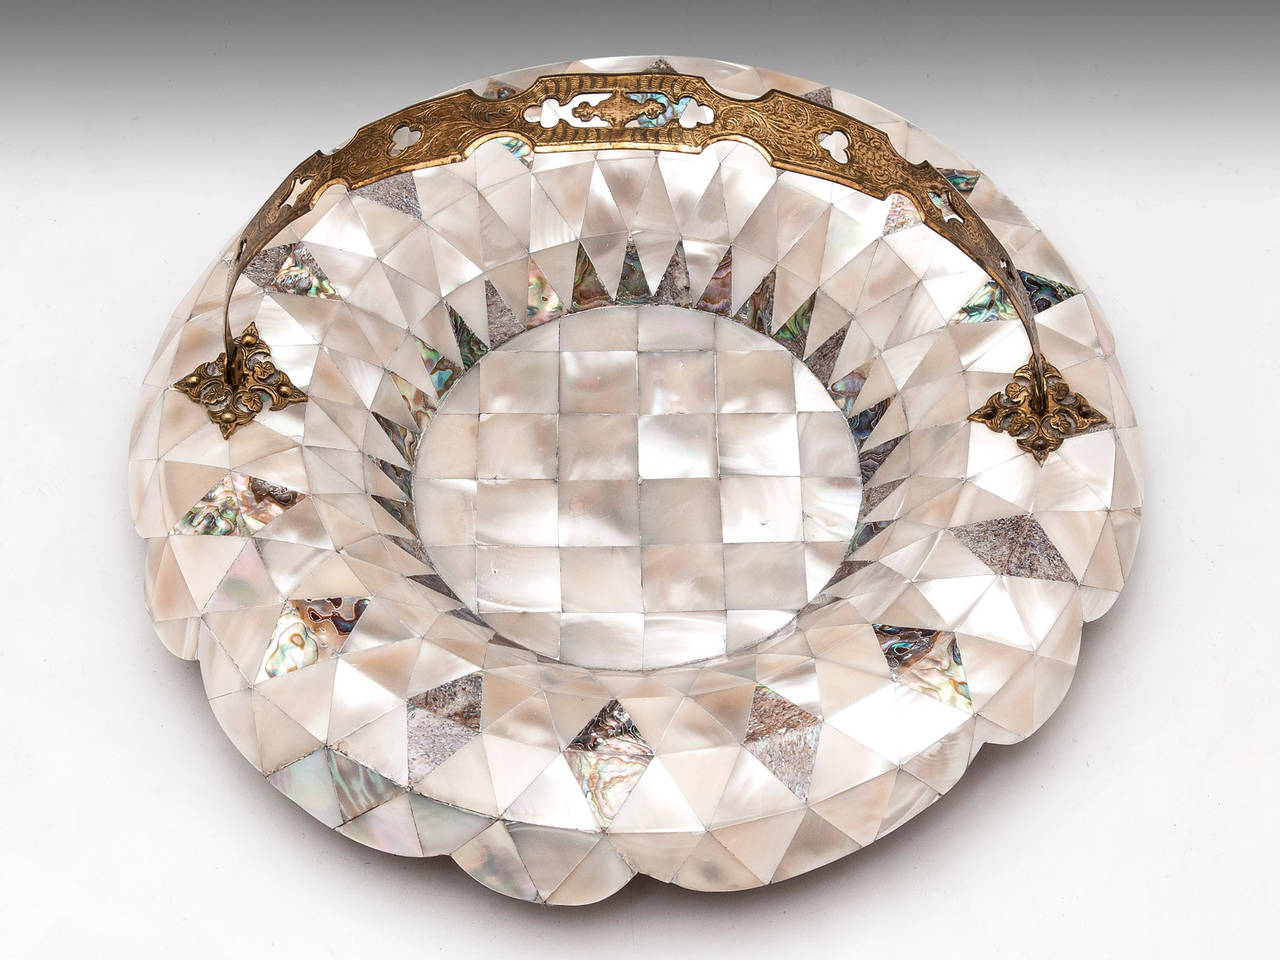 Unusual Bowl adorned with segments of Mother of Pearl and Abalone and featuring a ornate brass carry handle. 